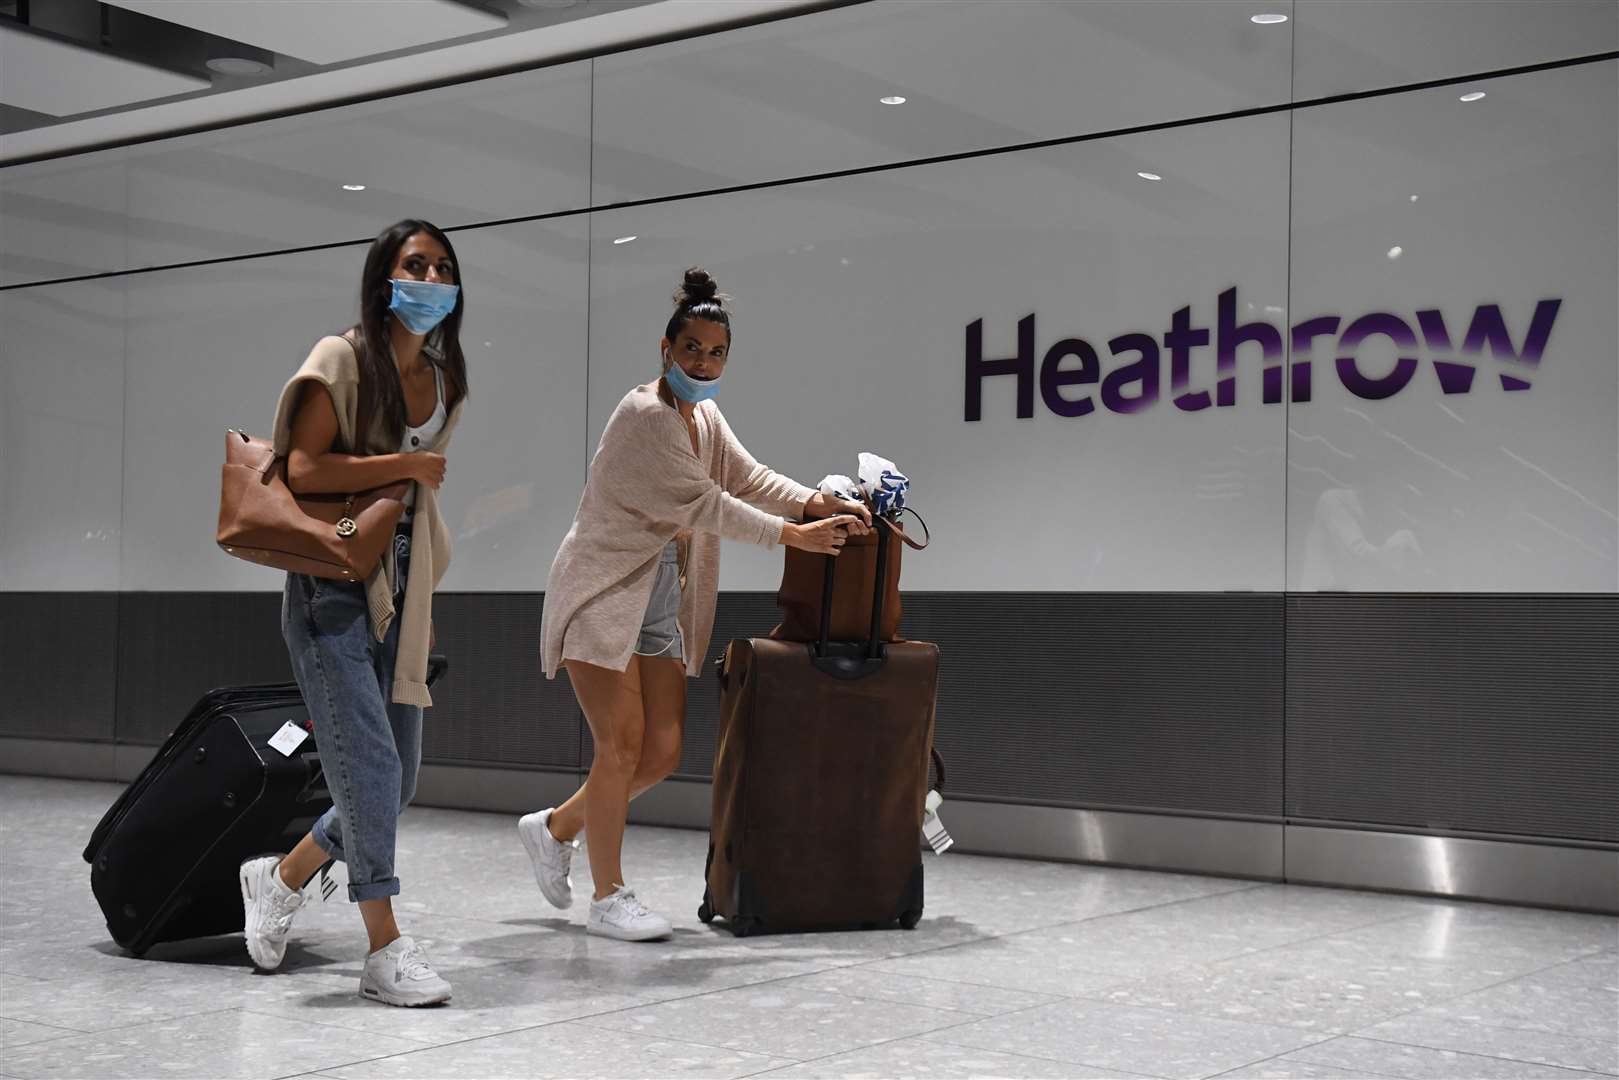 Passengers wearing face masks as they arrive at Heathrow Airport after a flight from Dubrovnik, Croatia (Kirsty O’Connor/PA)